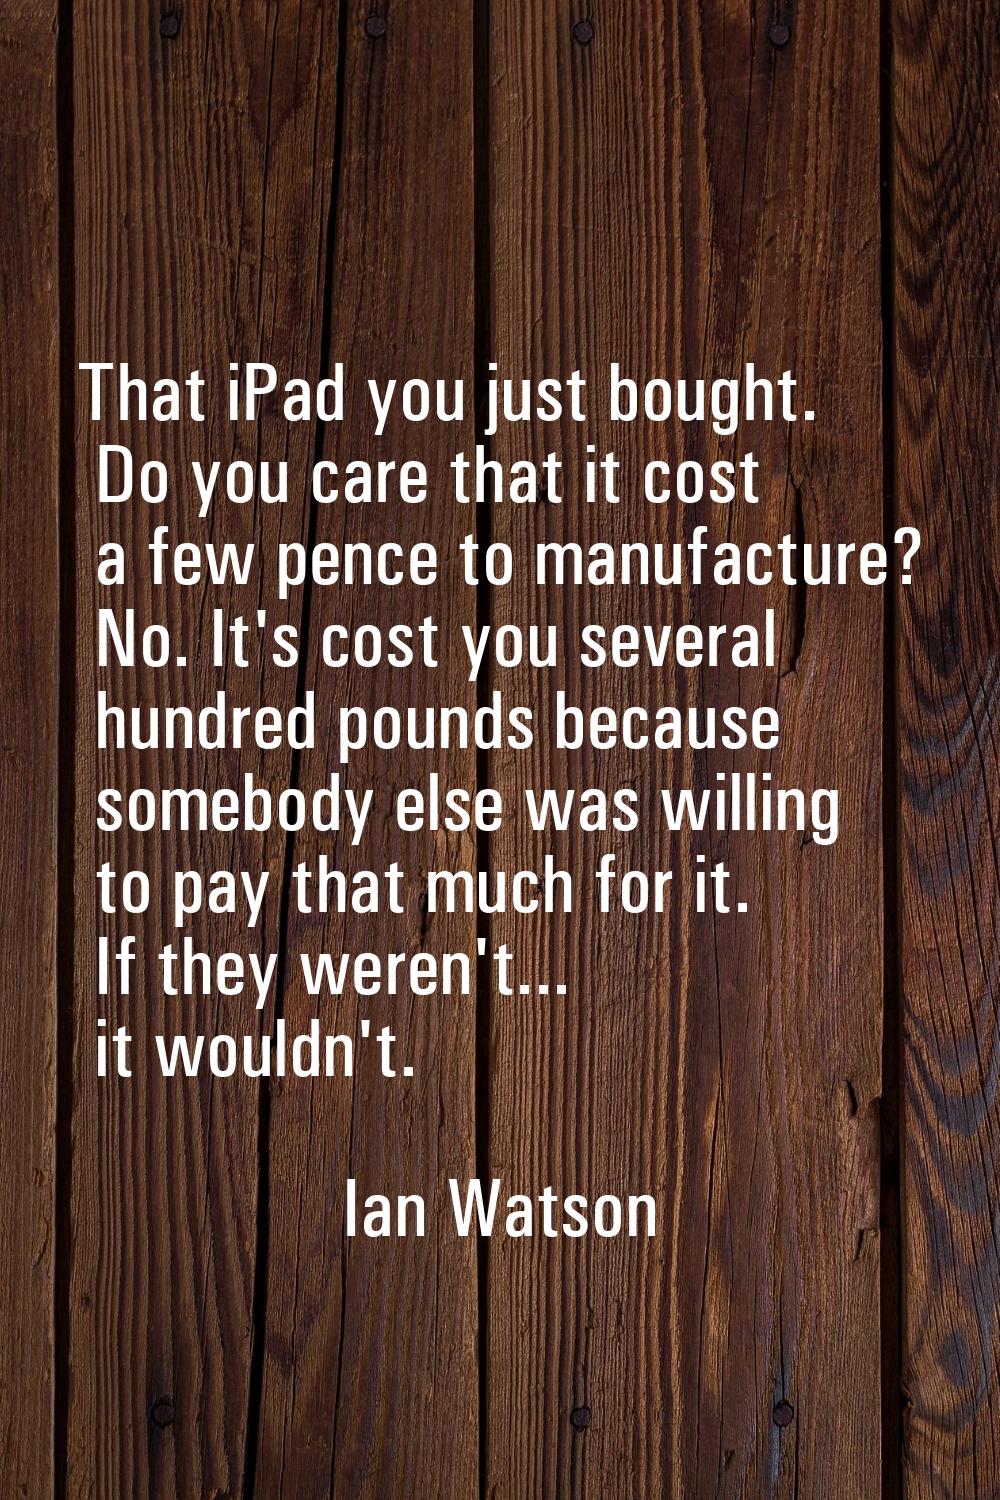 That iPad you just bought. Do you care that it cost a few pence to manufacture? No. It's cost you s